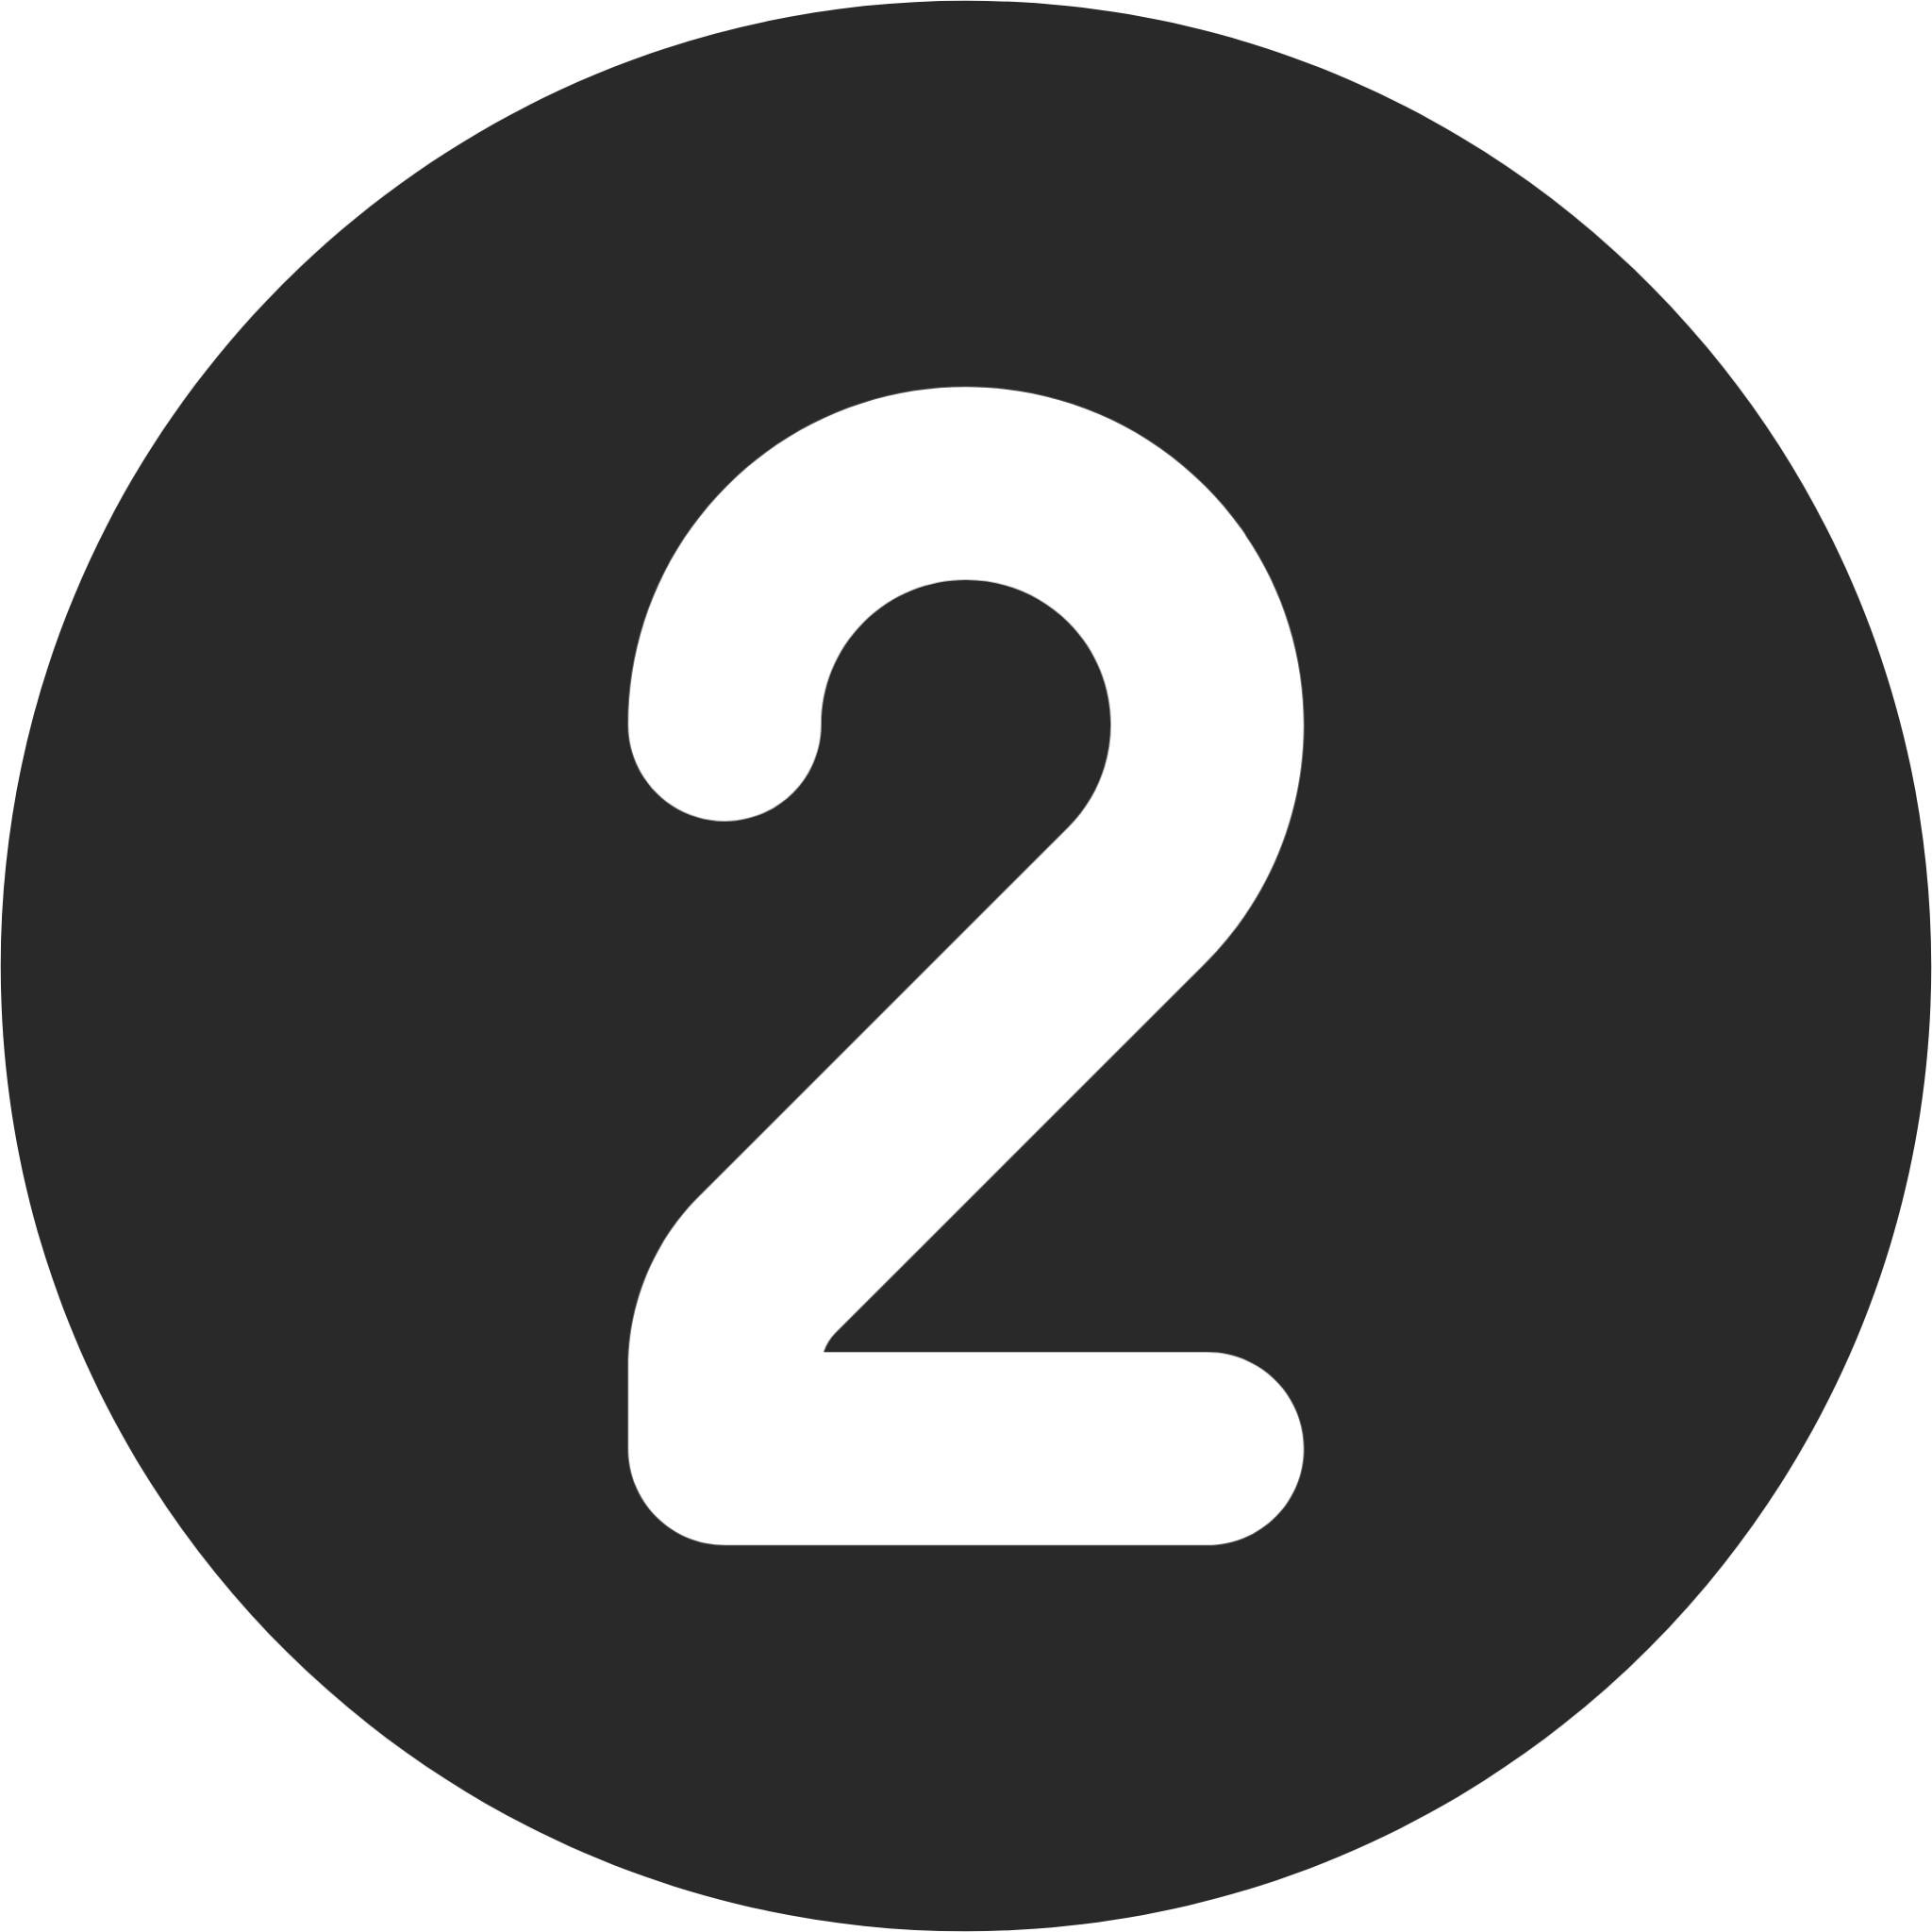 number 2 circle icon